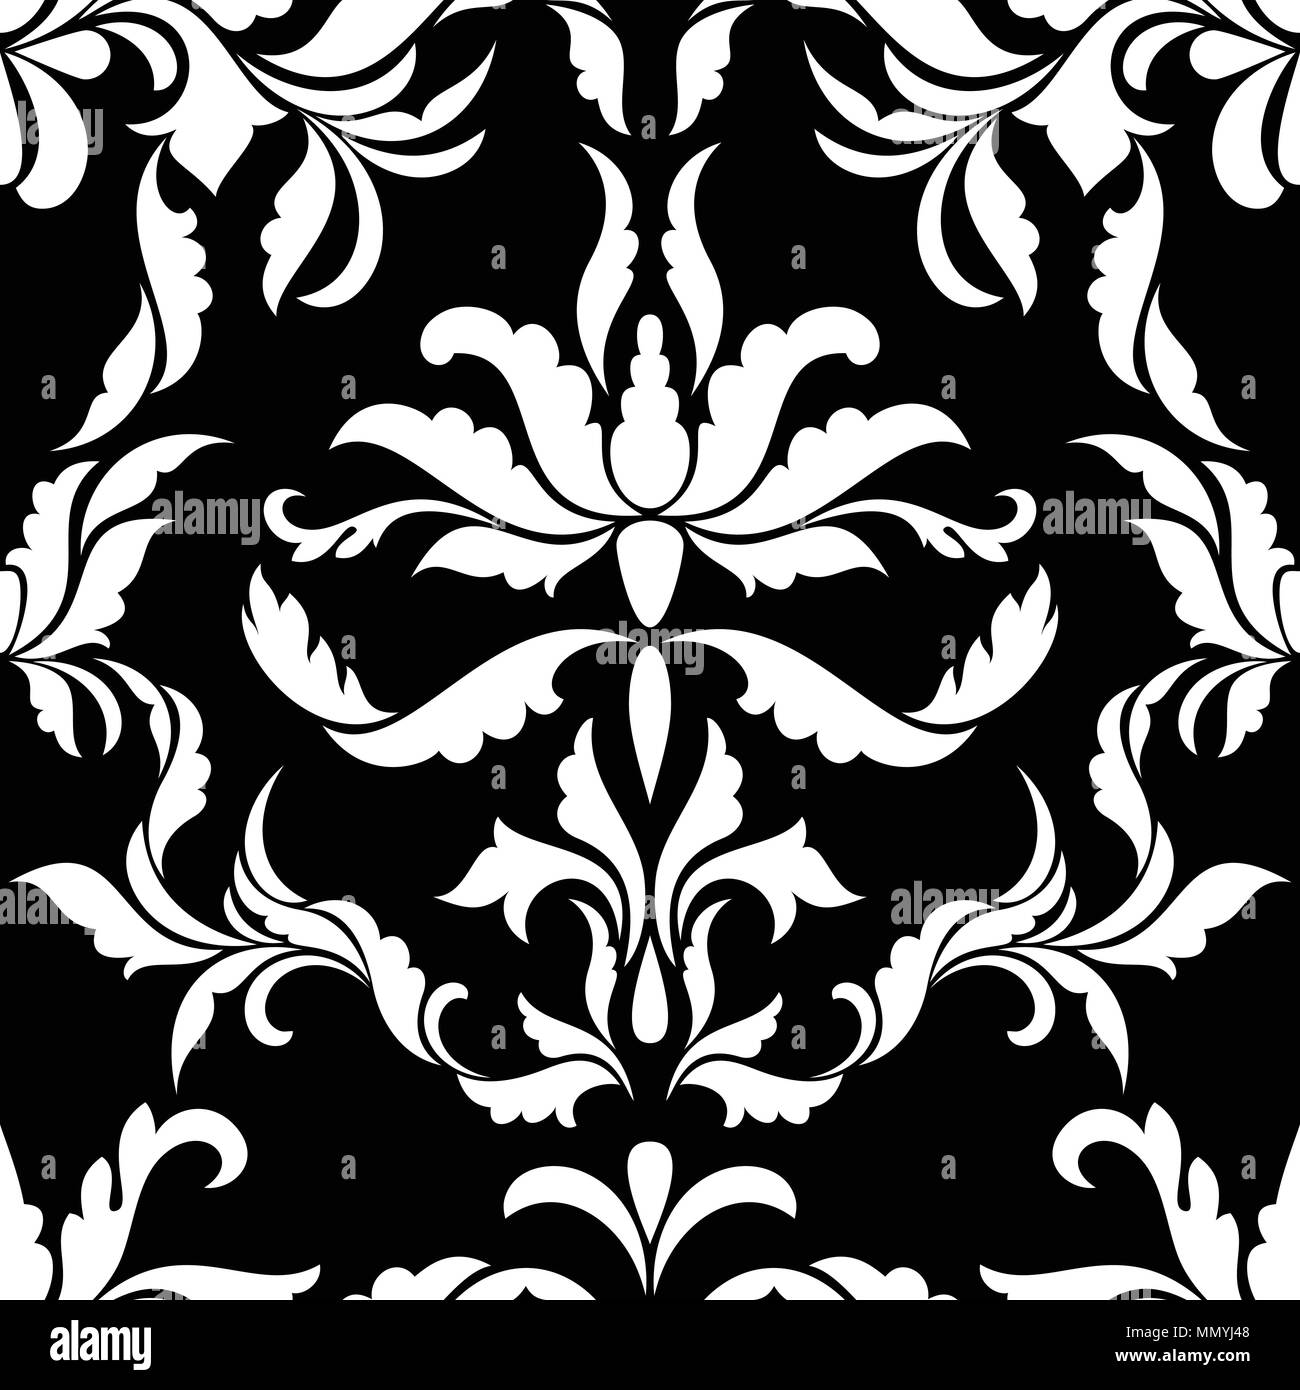 Damask Seamless Vector Pattern in Black and White colors.  Elegant floral Design in Royal  Baroque Style. Ideal for Textile Print and Wallpapers. Stock Vector